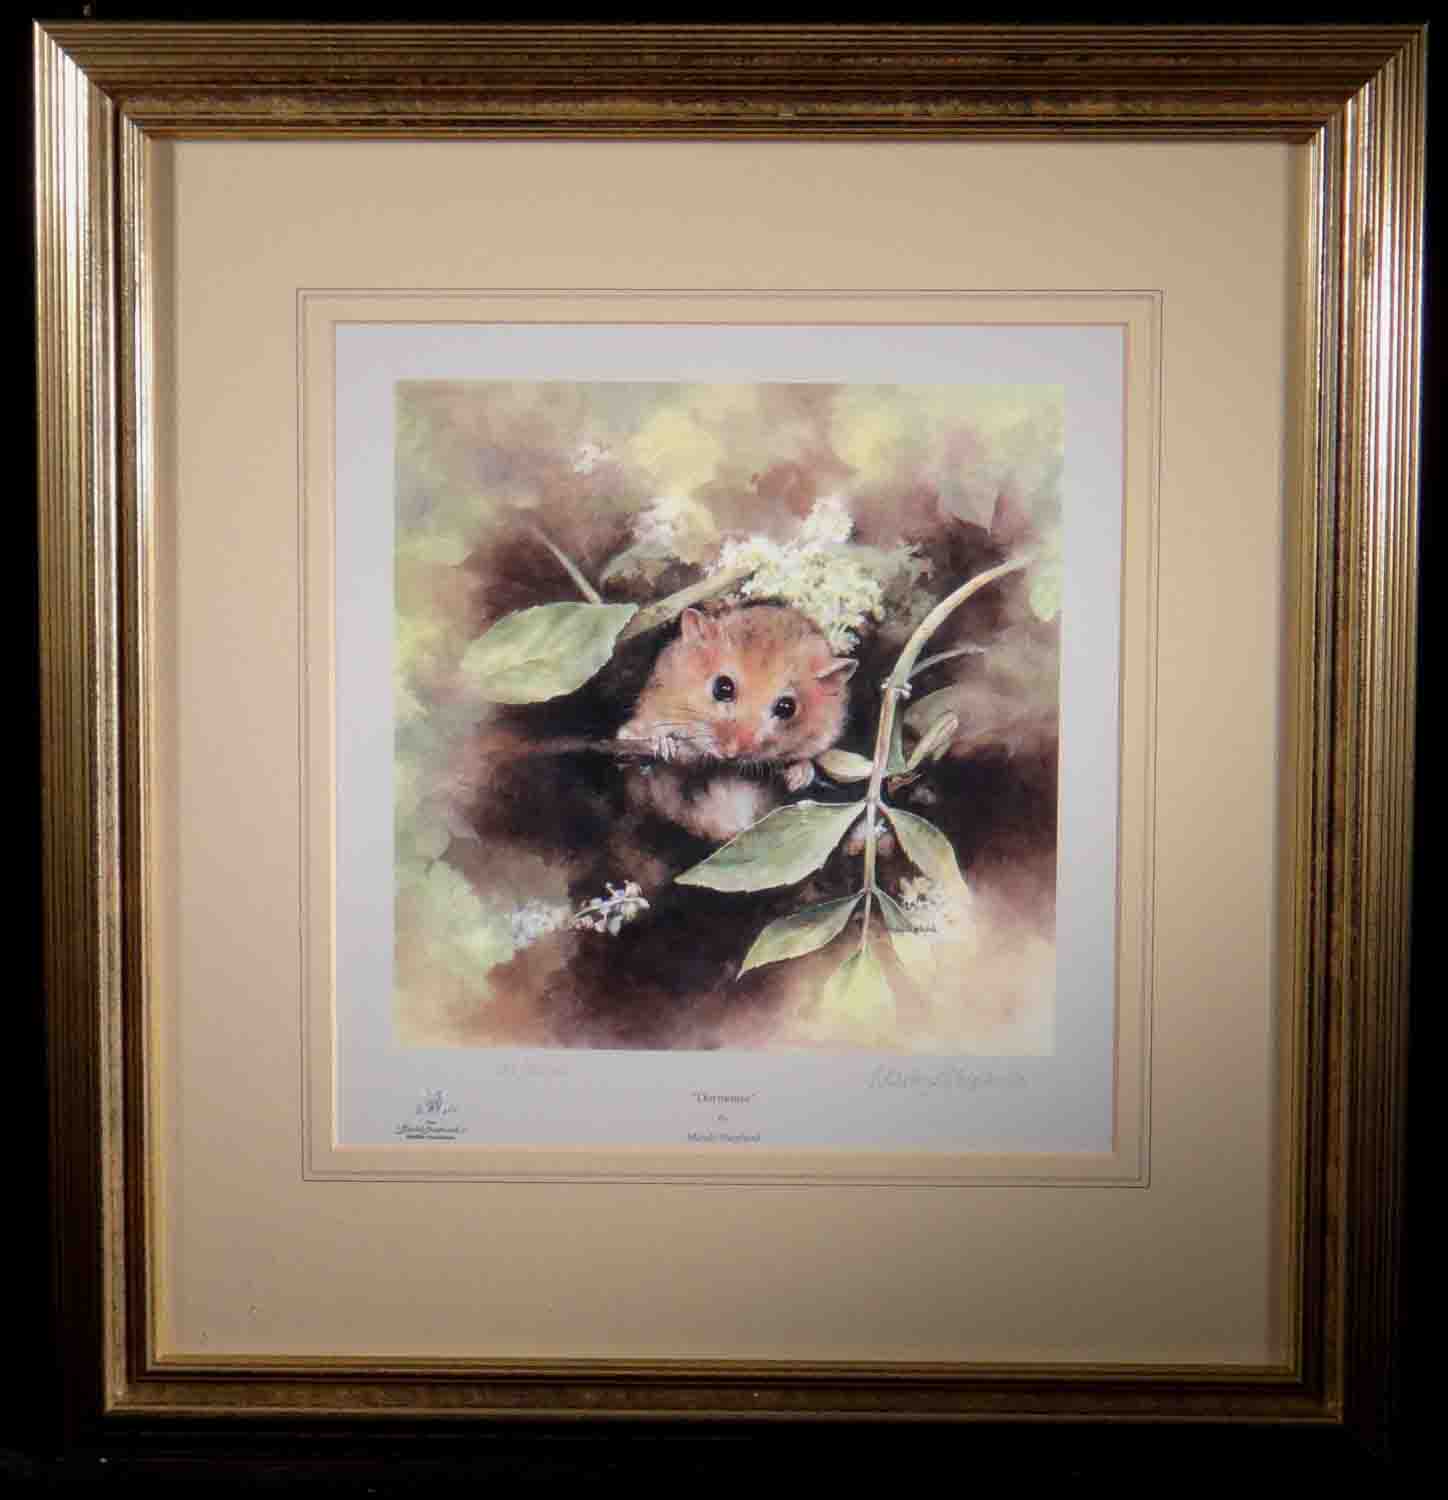 mandy shepherd, dormouse, signed limited edition print